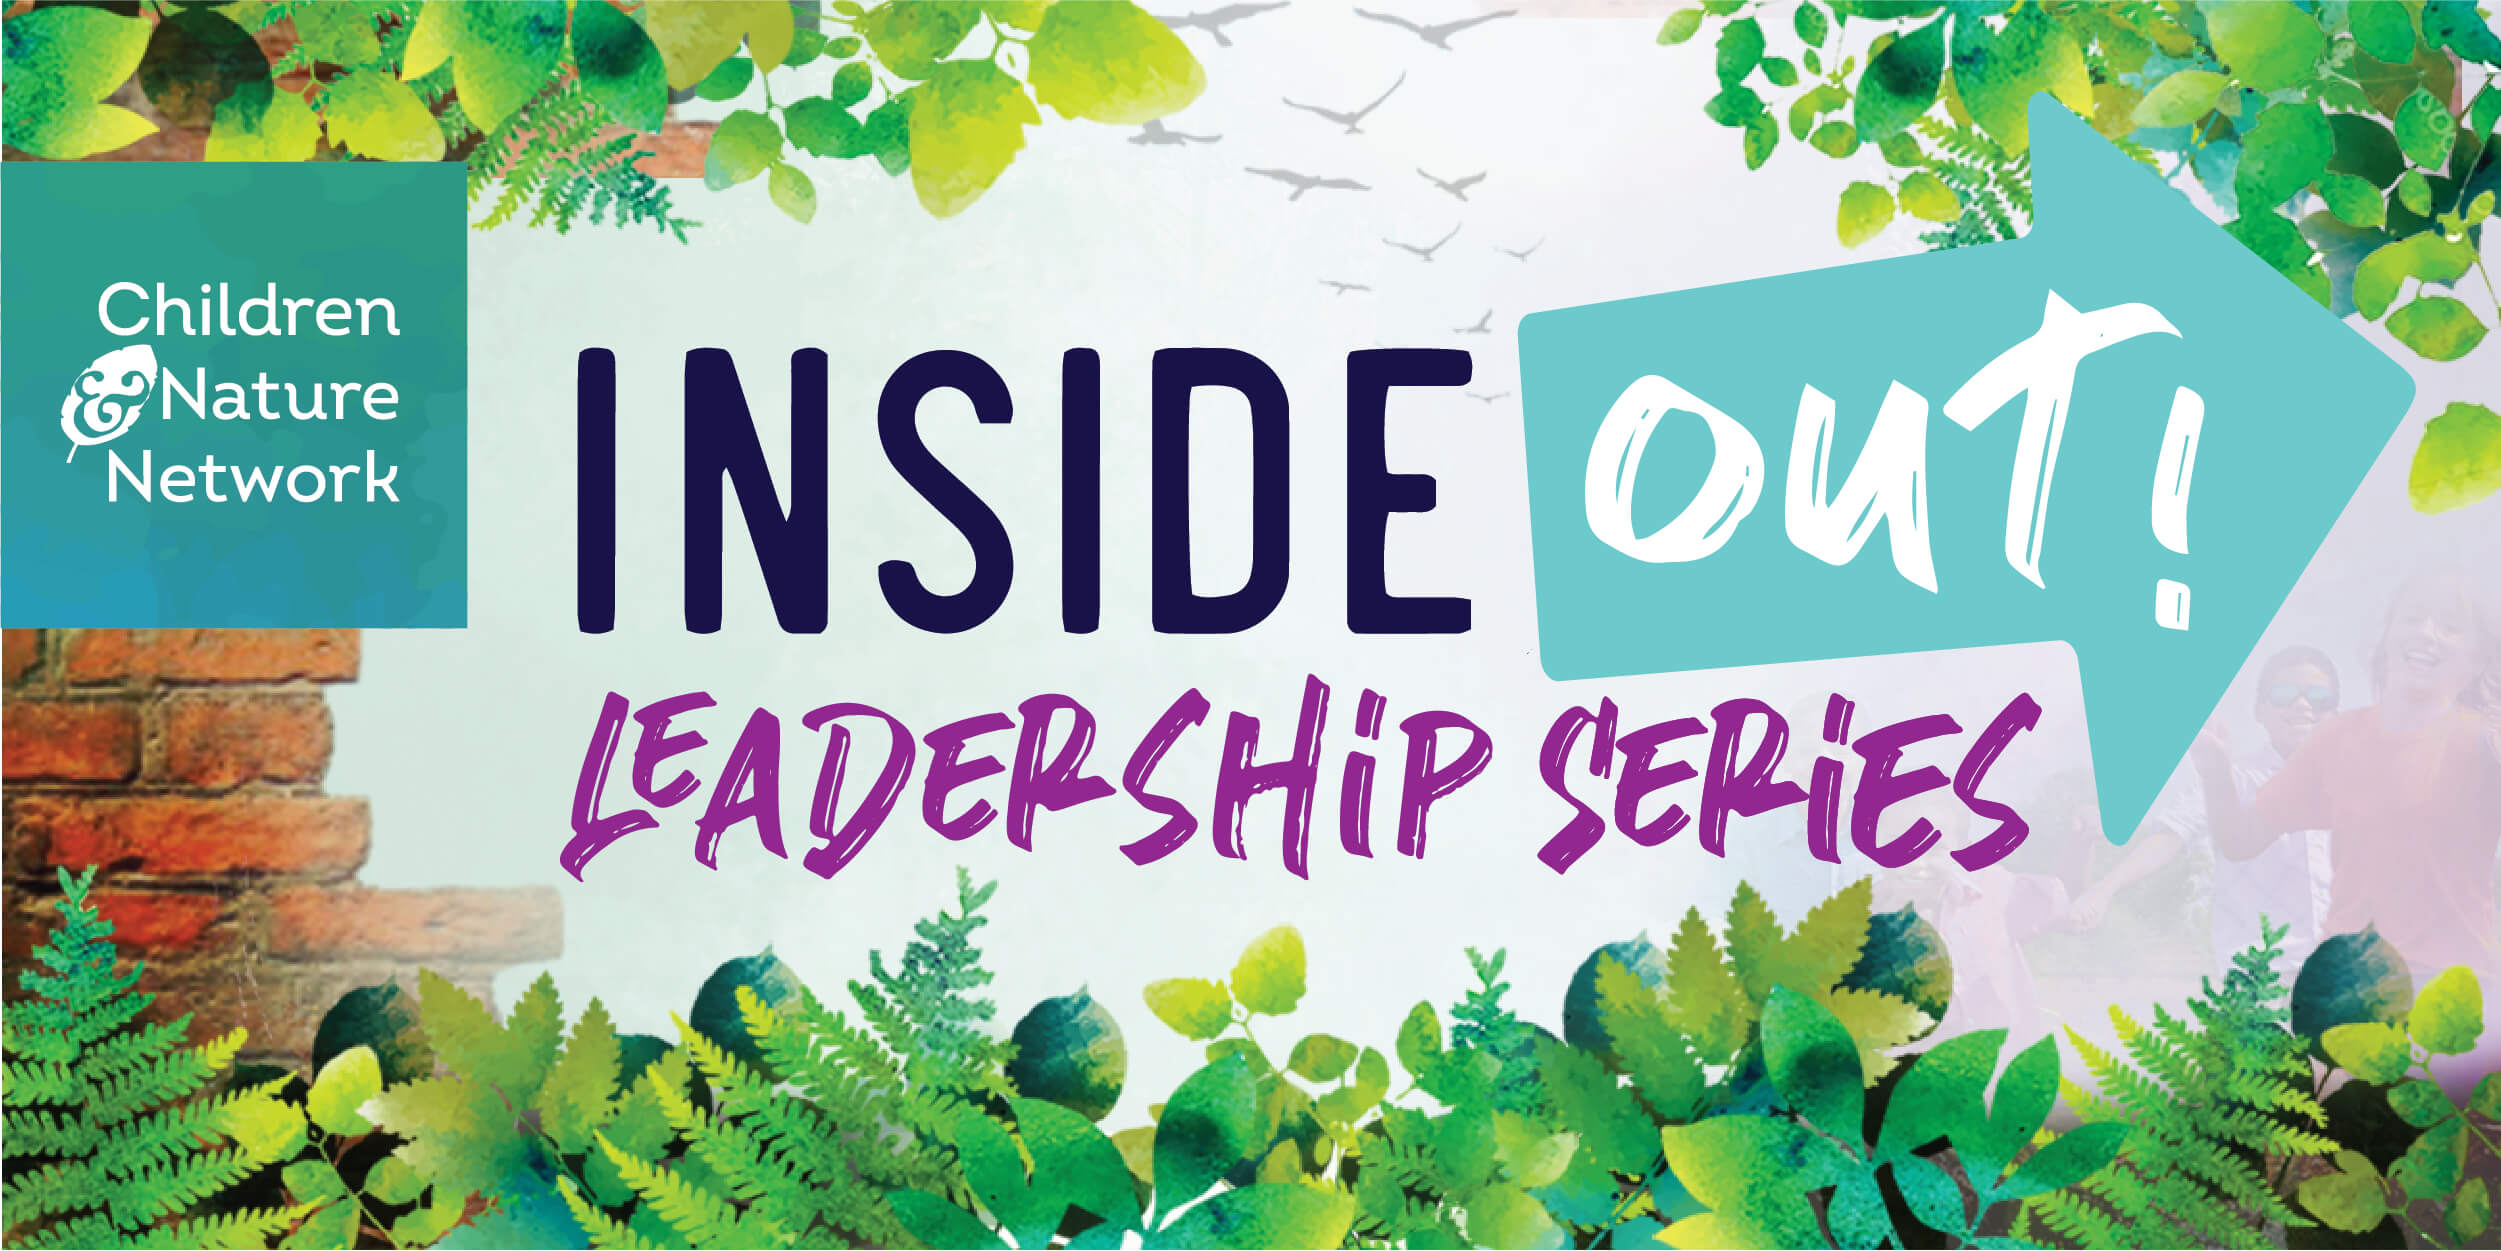 Inside Out Leadership Series